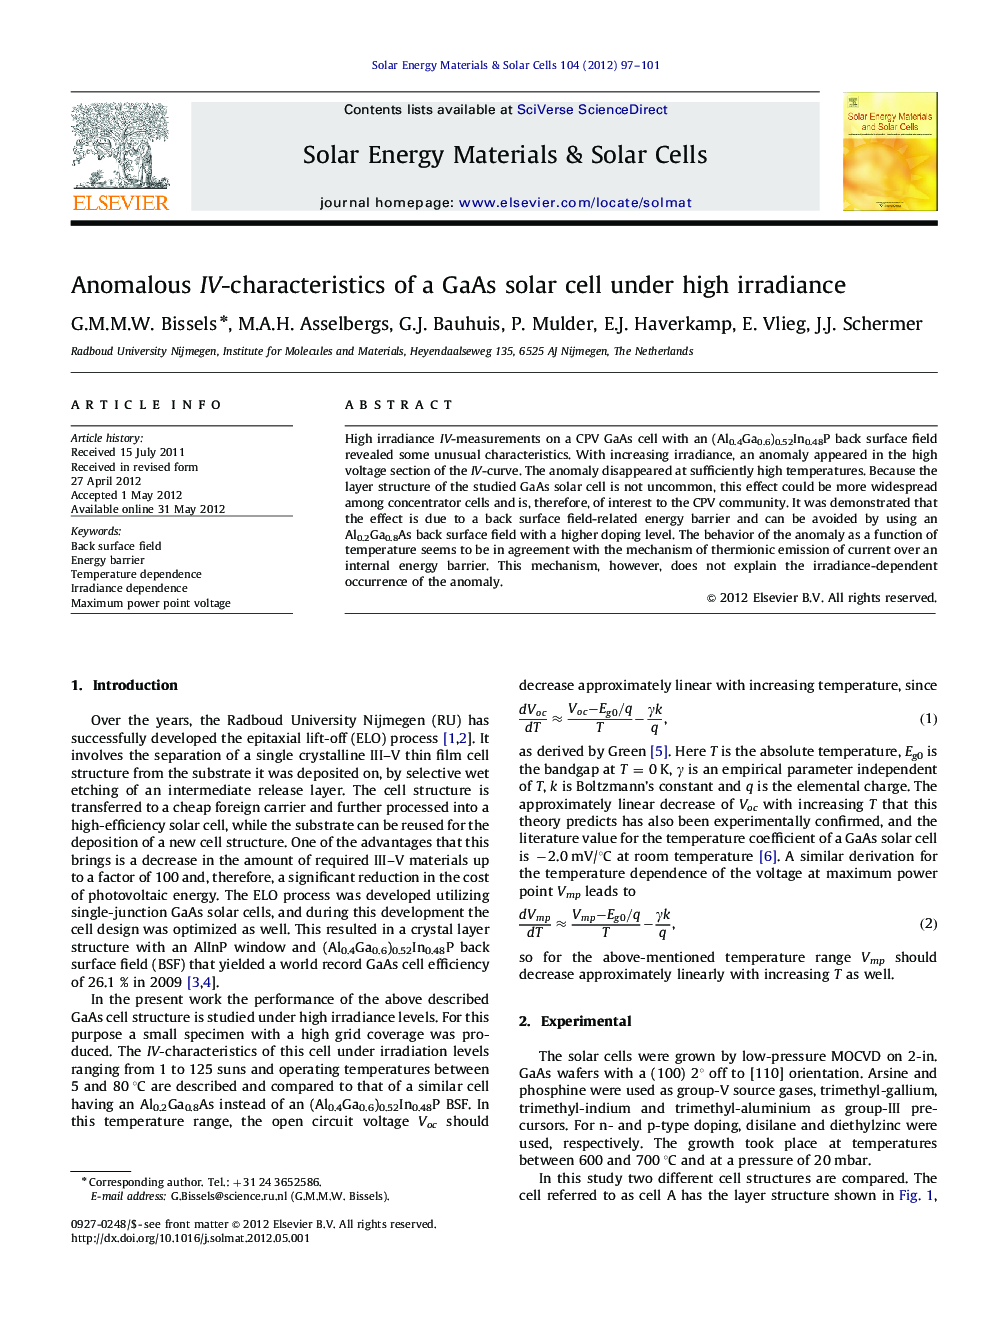 Anomalous IV-characteristics of a GaAs solar cell under high irradiance